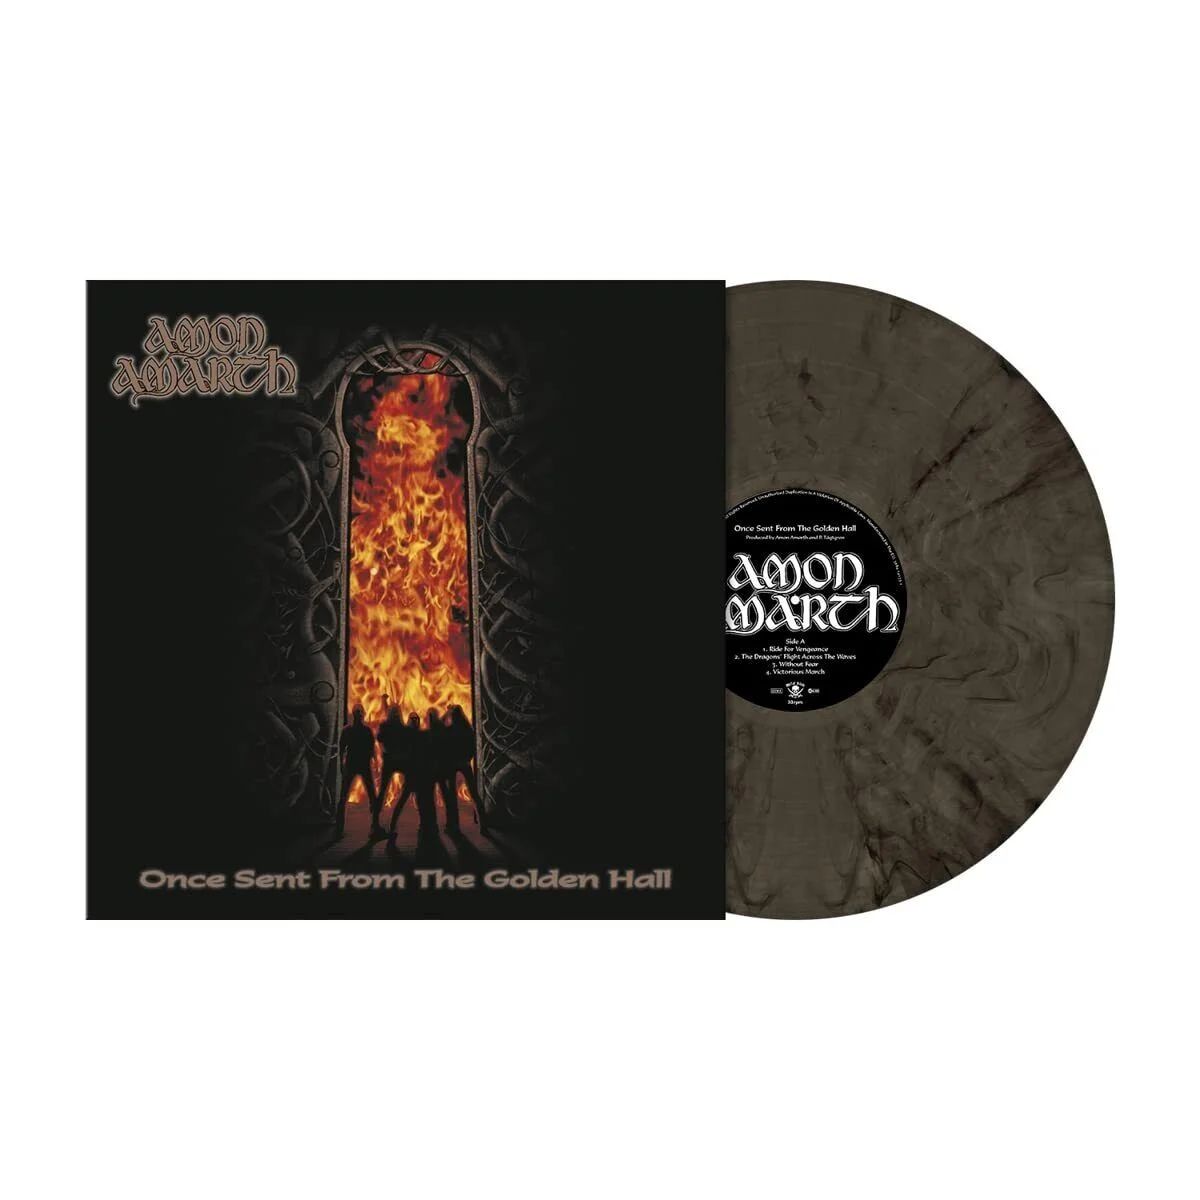 amon amarth once sent from the golden hall coloured lp 2022 smoke grey marbled виниловая пластинка Виниловая пластинка Amon Amarth, Once Sent From The Golden Hall (coloured) (0039841413397)